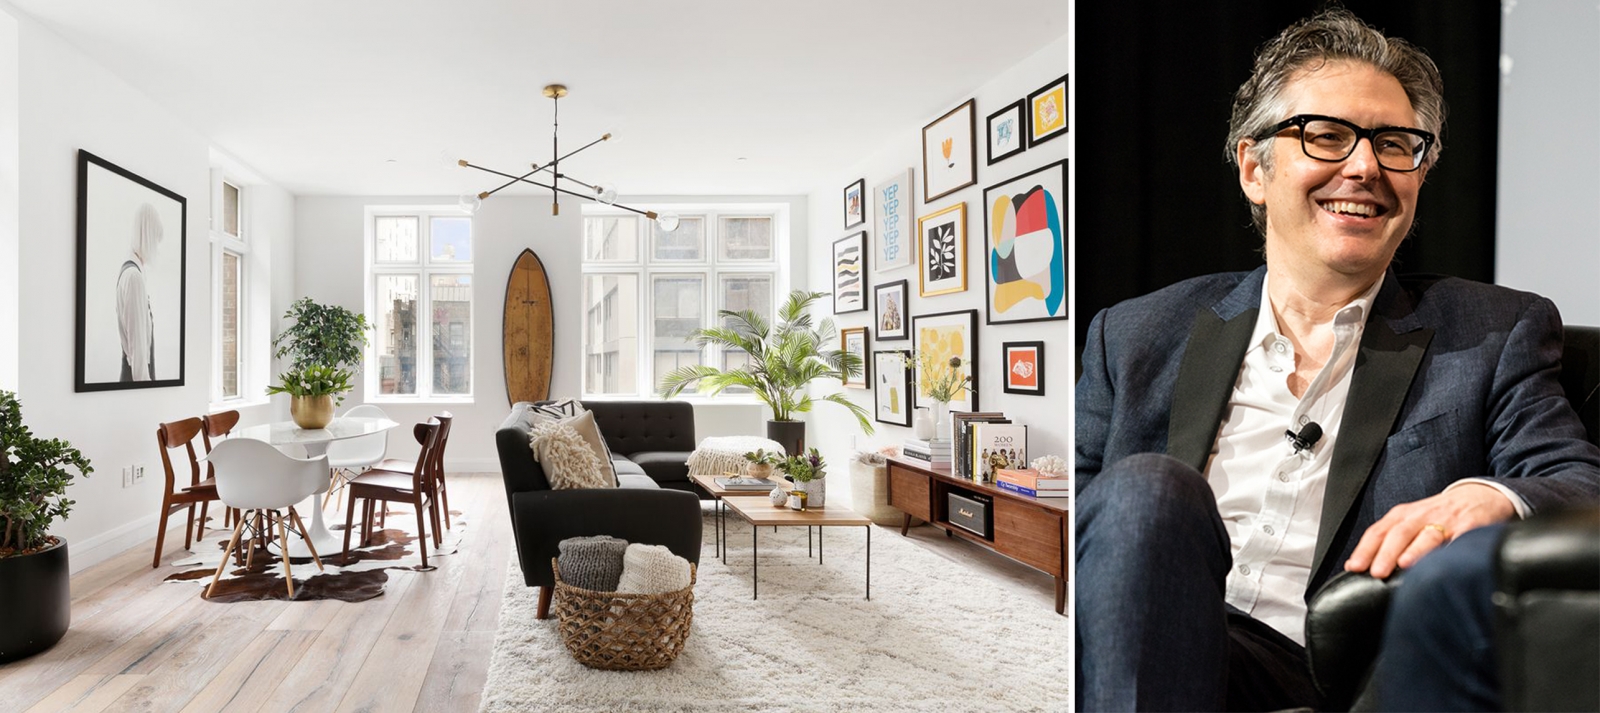 image of ira glass and the chelsea apartment he's selling